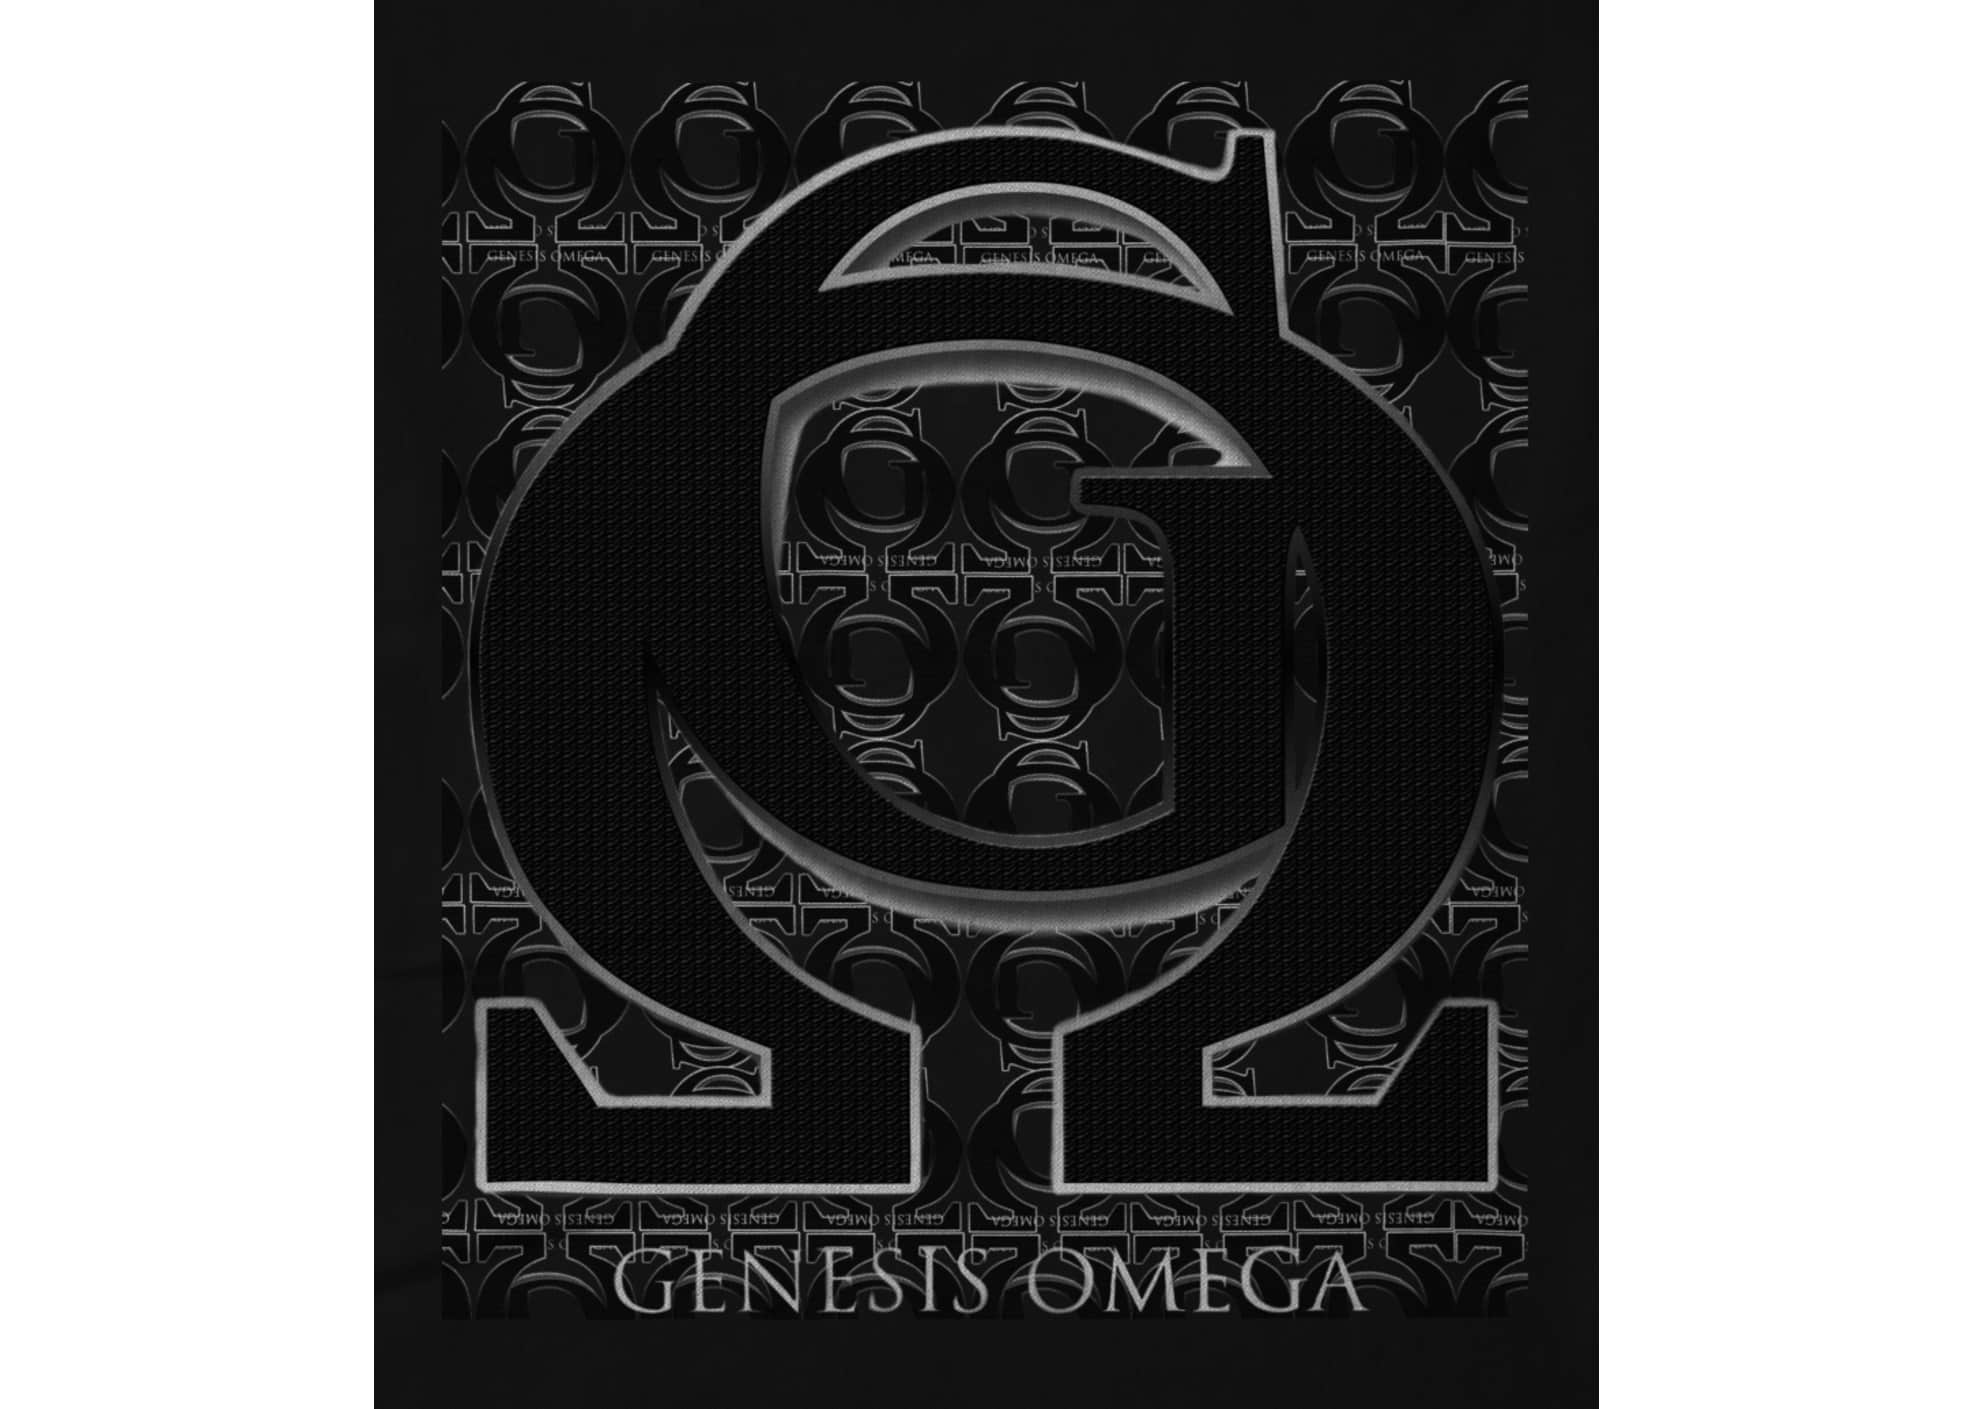 Genesis omega productions special edition logo blk 1494532455